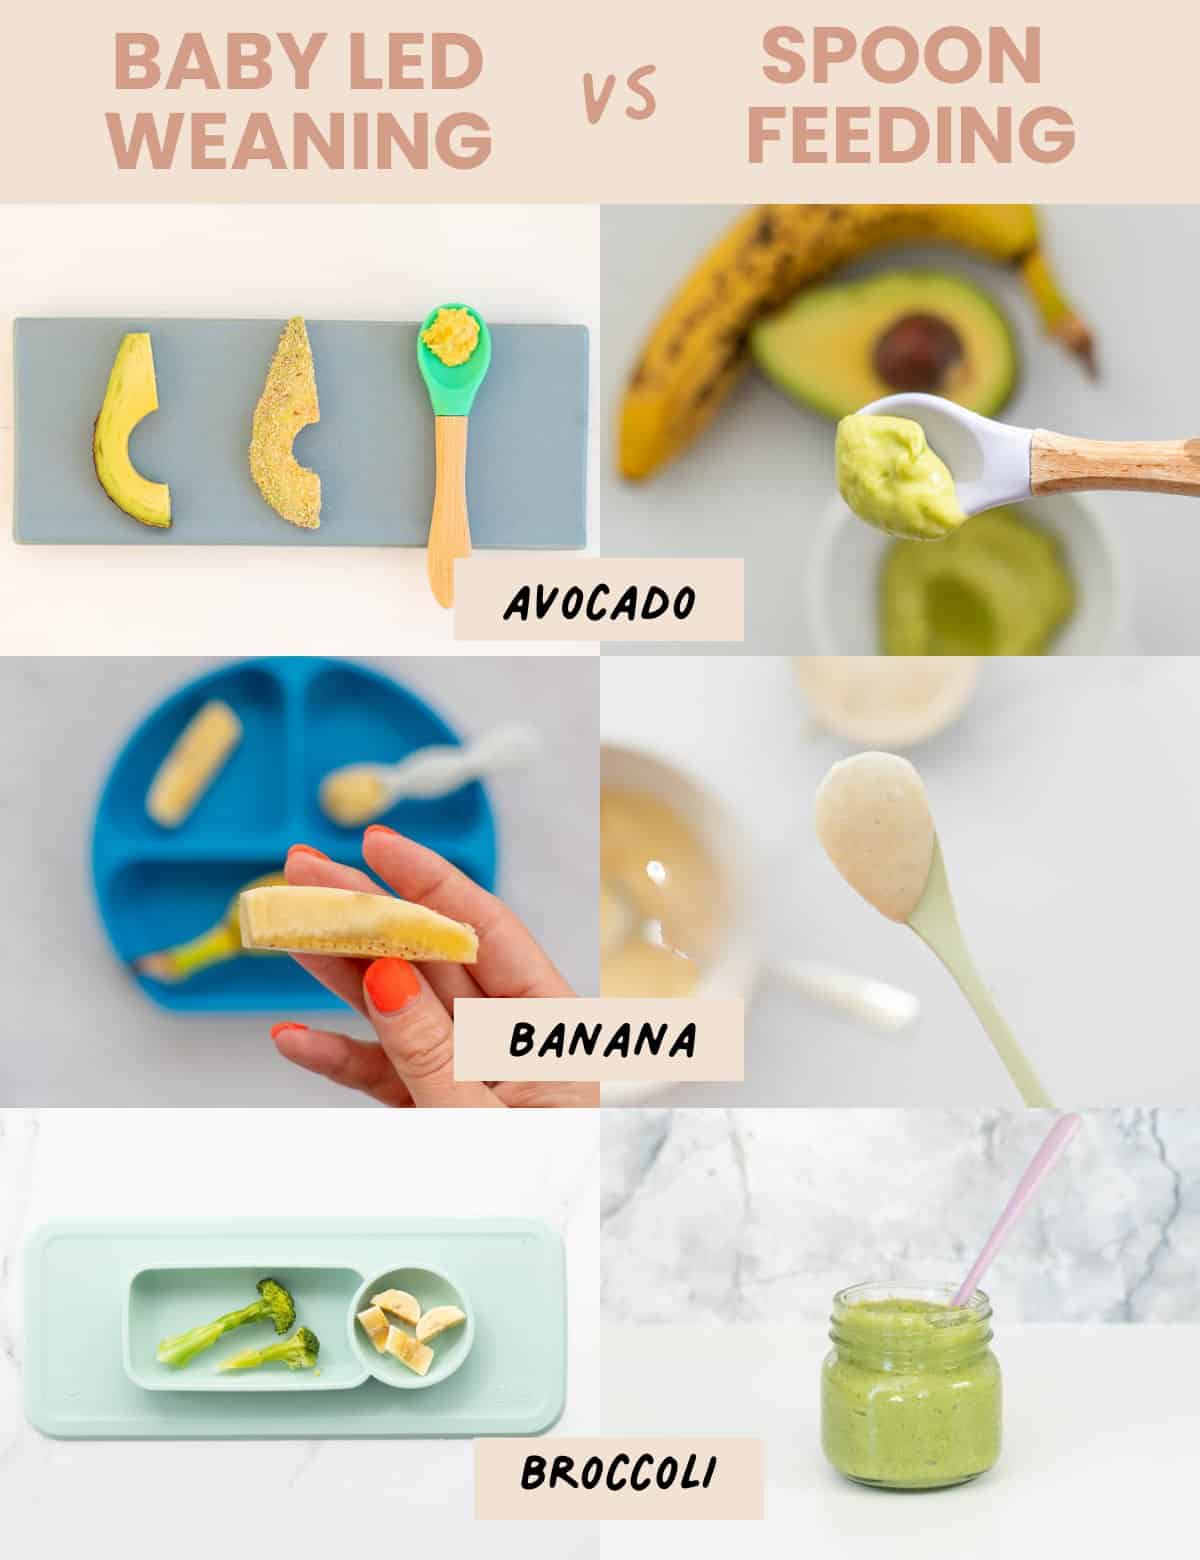 Broccoli, banana and avocado served as both a finger food and prepared as a bay puree, with text overlay: Baby led weaning vs. Spoon feeding.